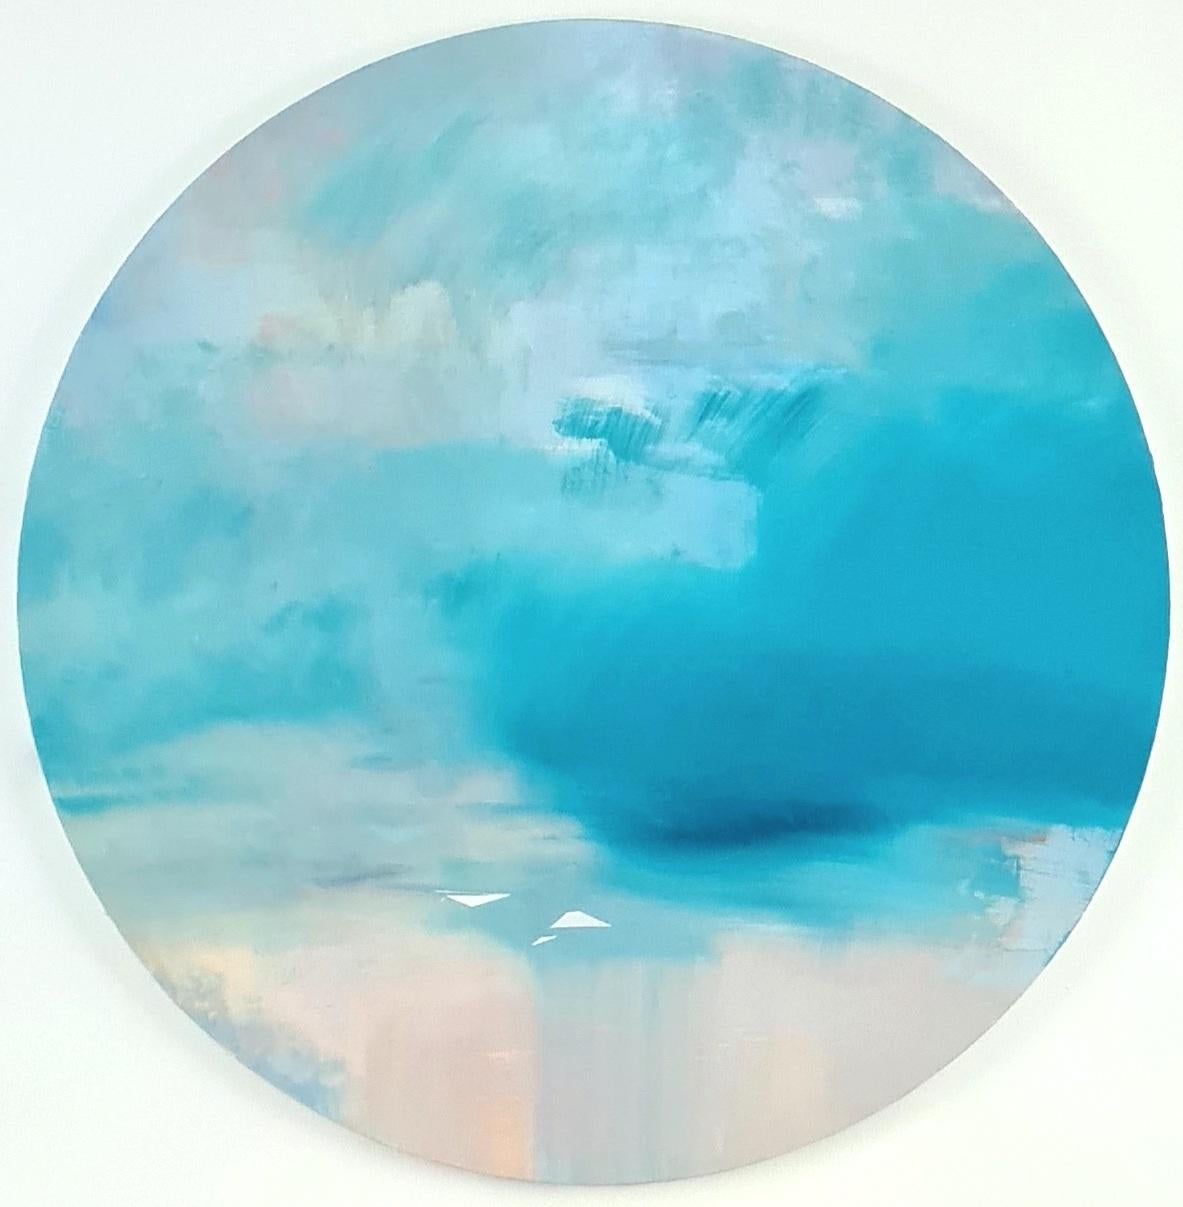 Migration: Teal, Original painting, Landscape, Abstract, Oil, Circle art, Blue - Painting by Yuliya Martynova